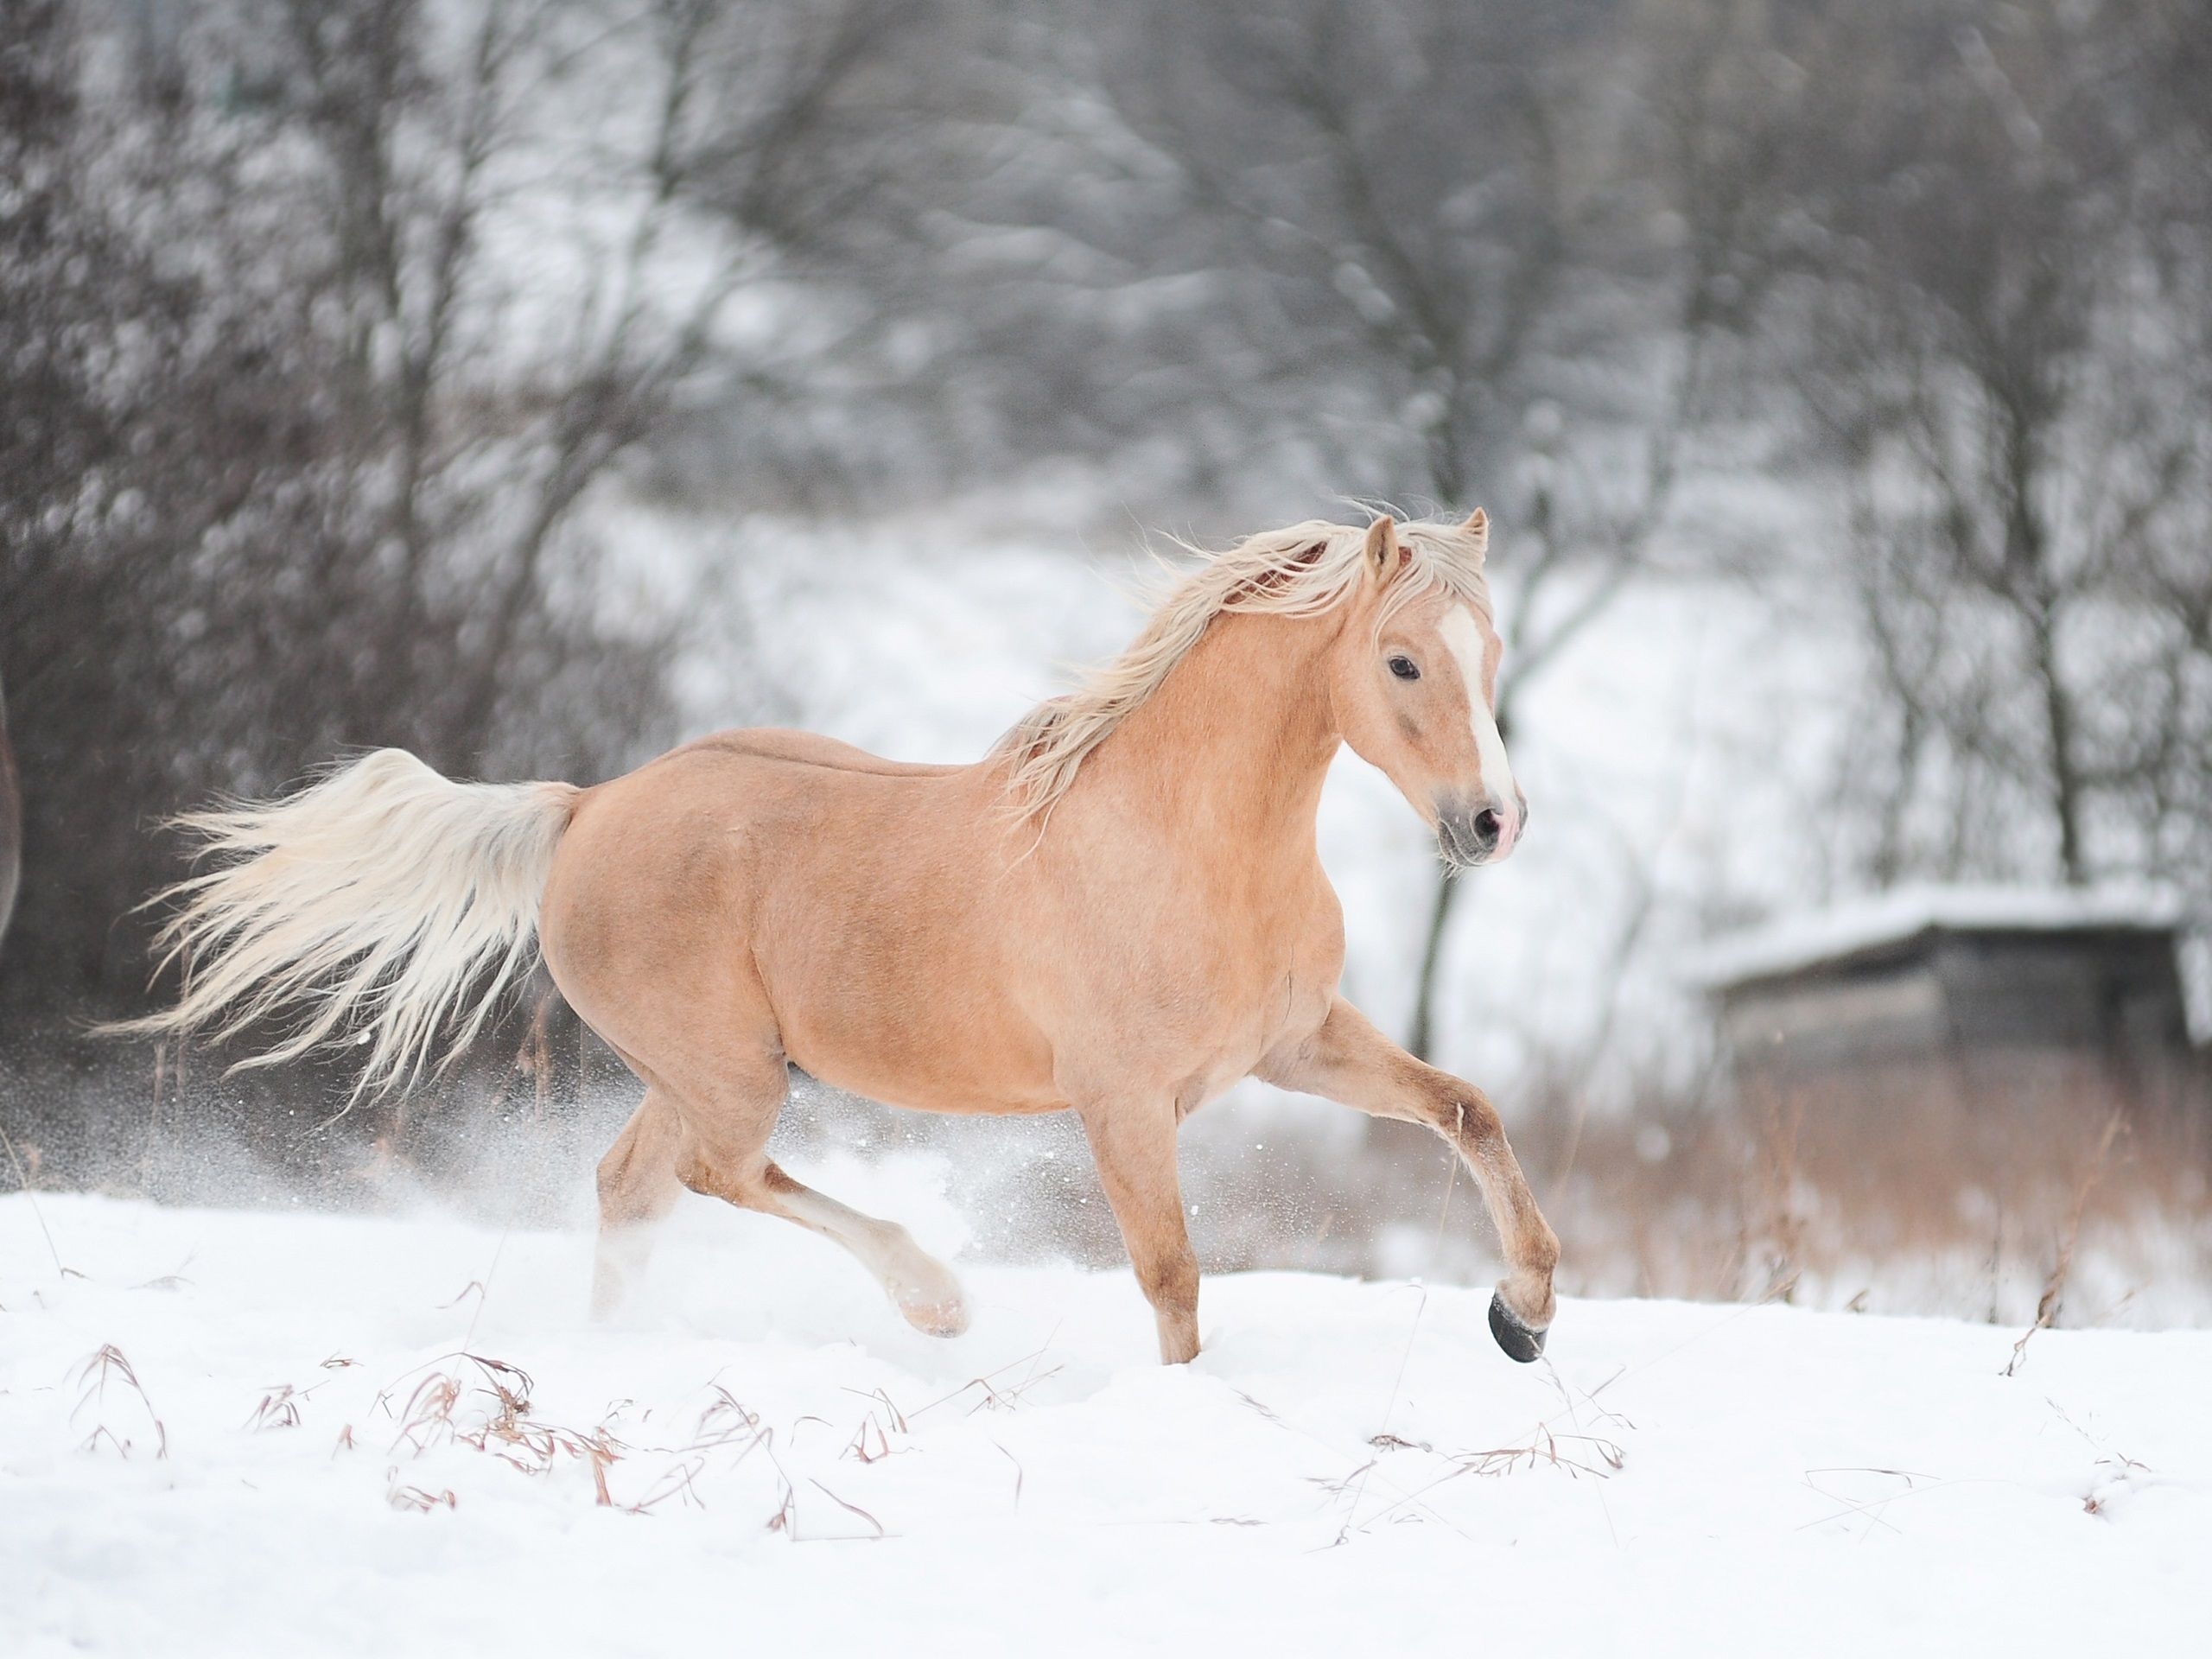 Horses in the Snow, Winter horse wallpapers, Majestic creatures, Snowy landscapes, 2560x1920 HD Desktop